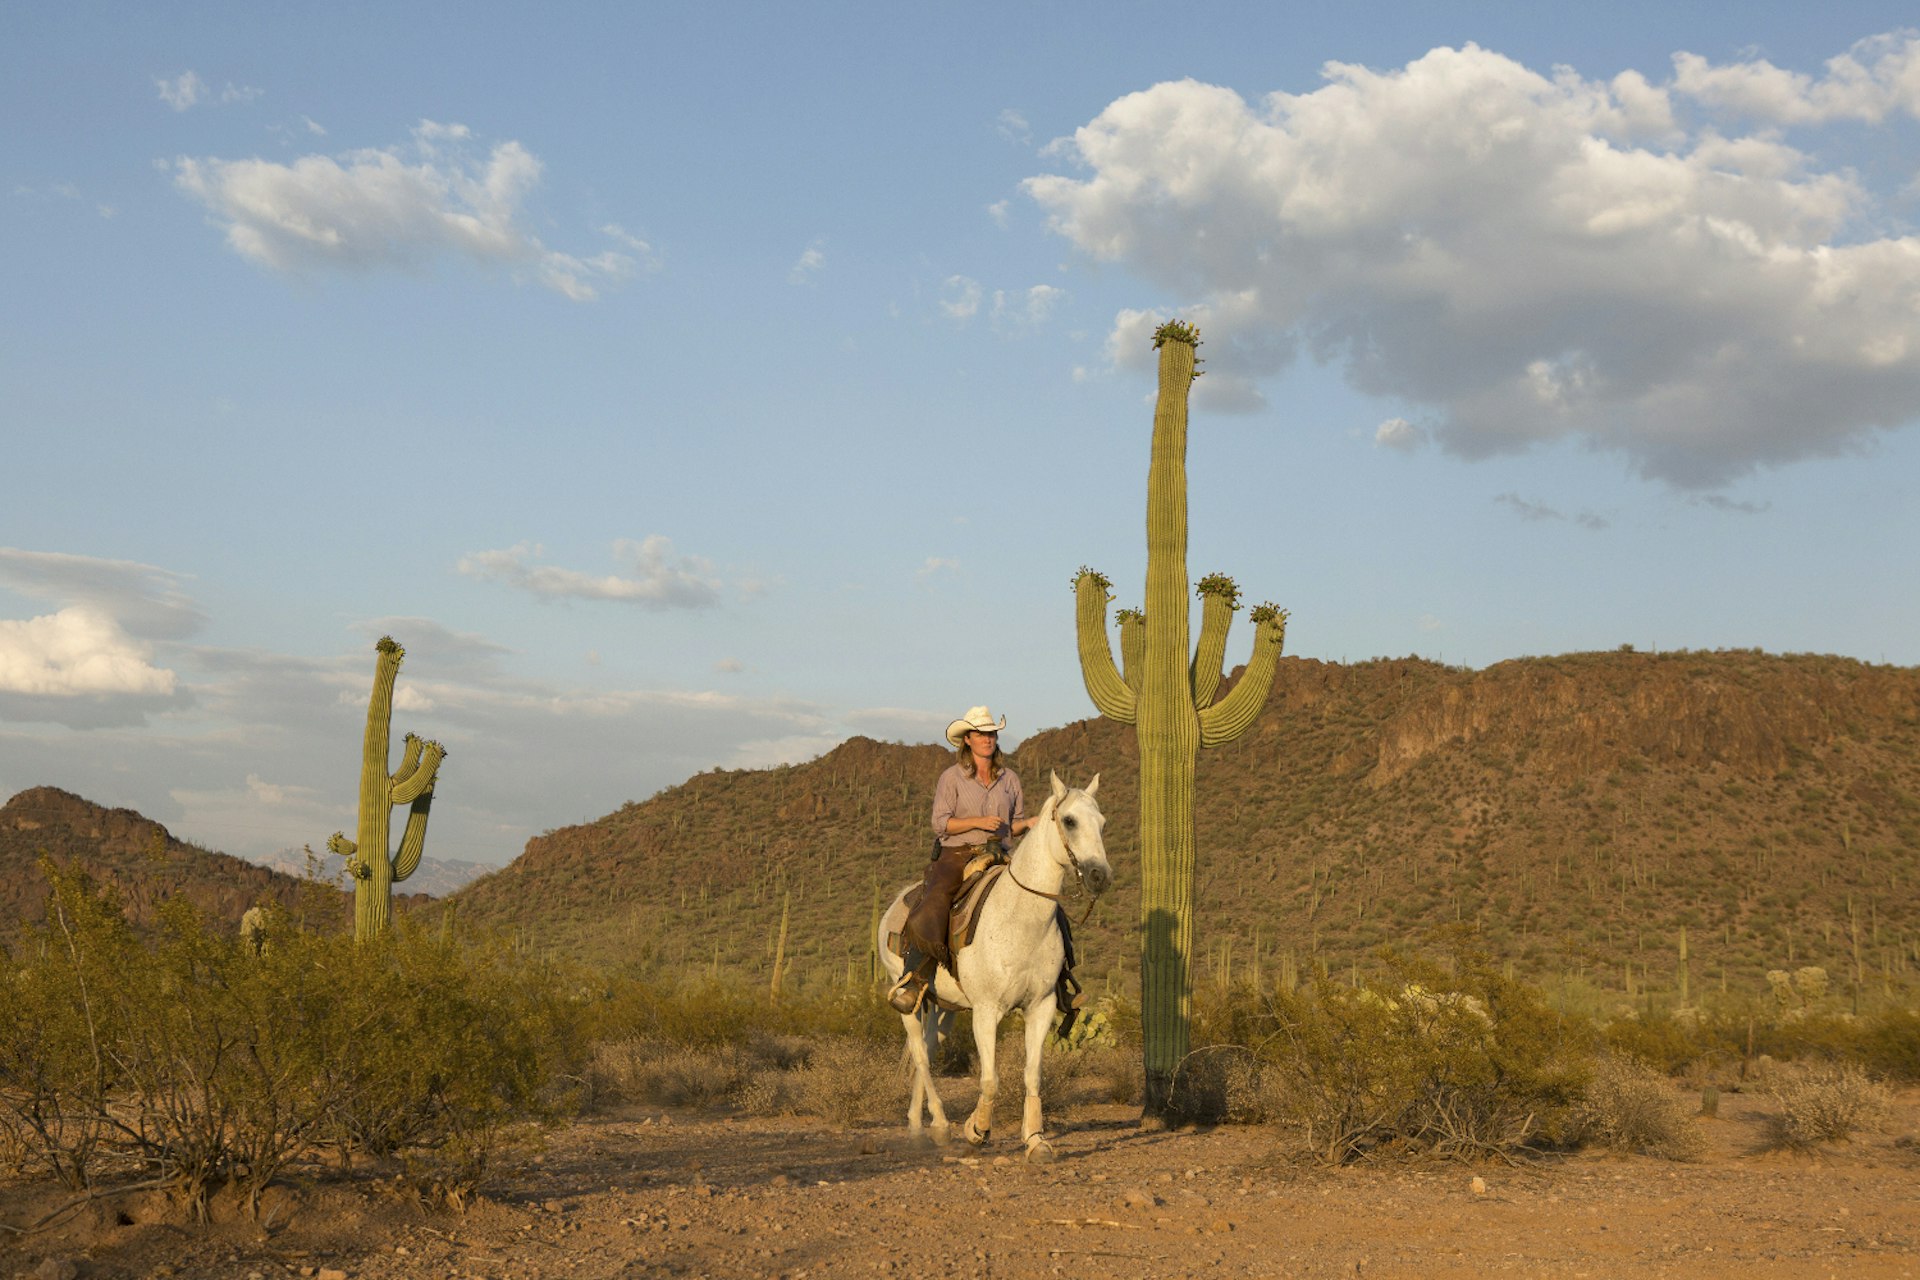 Laura True with her horse Lobo in the Sonoran desert at the White Stallion Ranch in Tucson, Arizona.